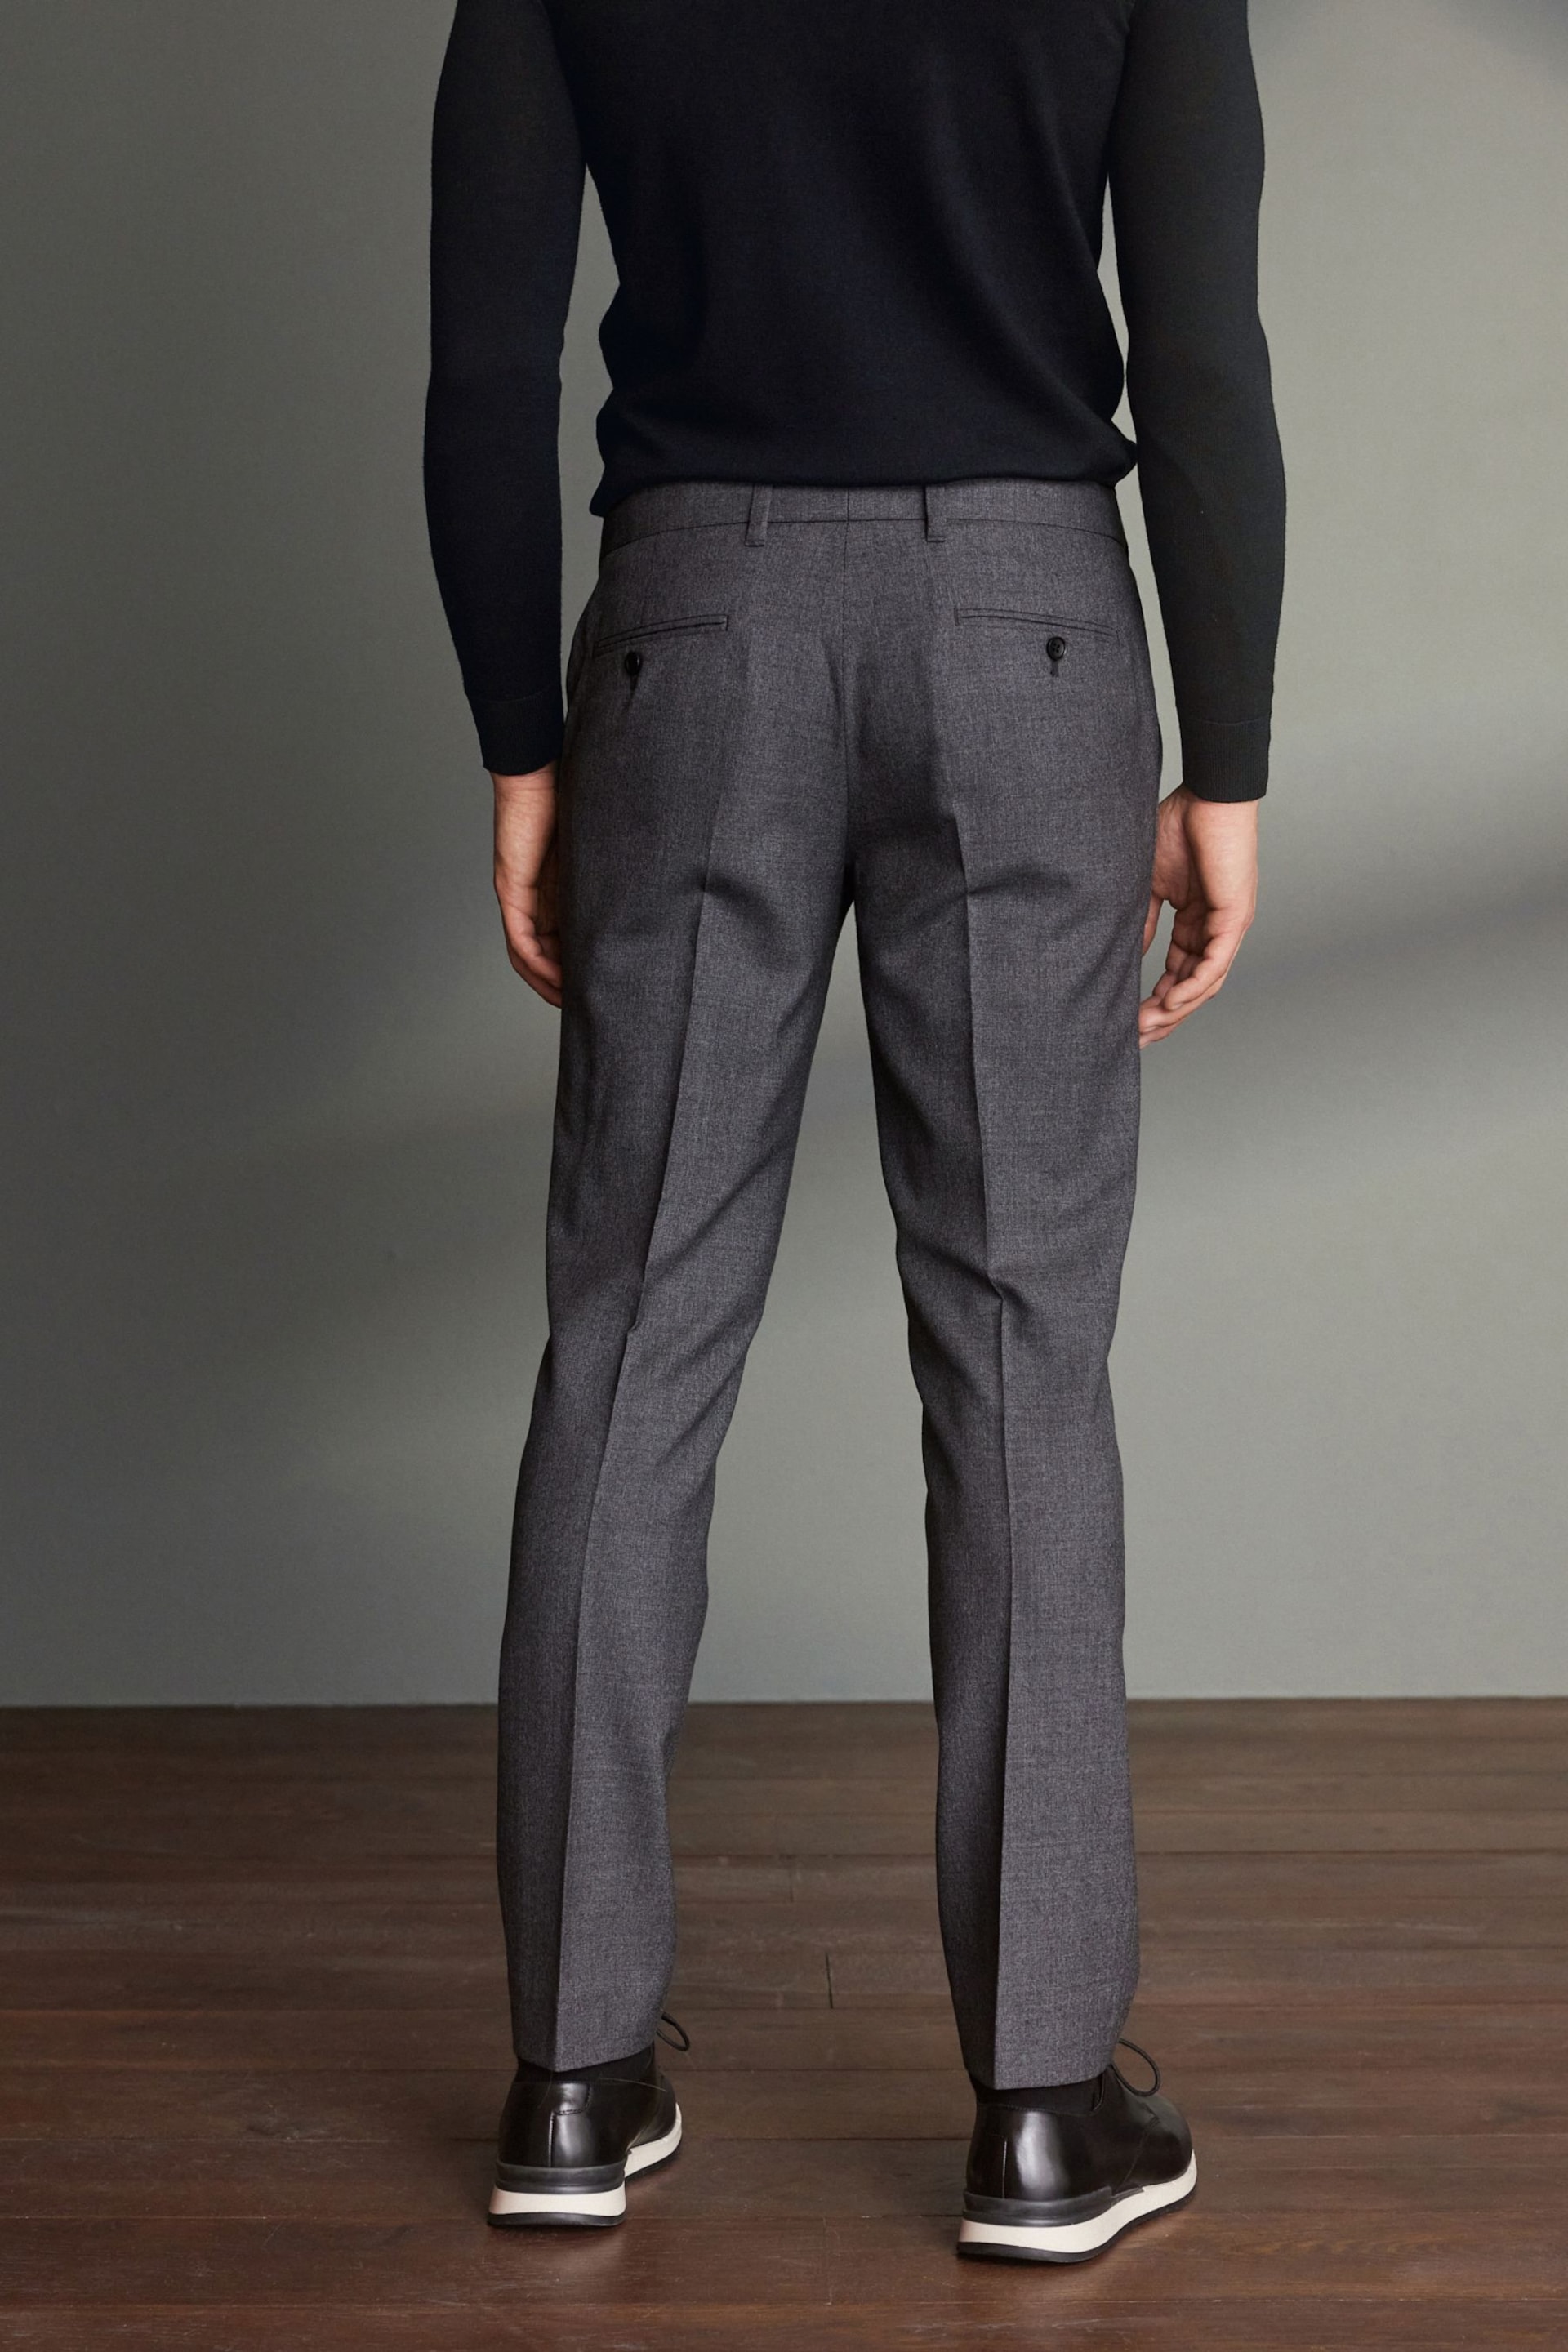 Grey Slim Fit Signature 100% Wool Trousers With Motion Flex Waistband - Image 4 of 6